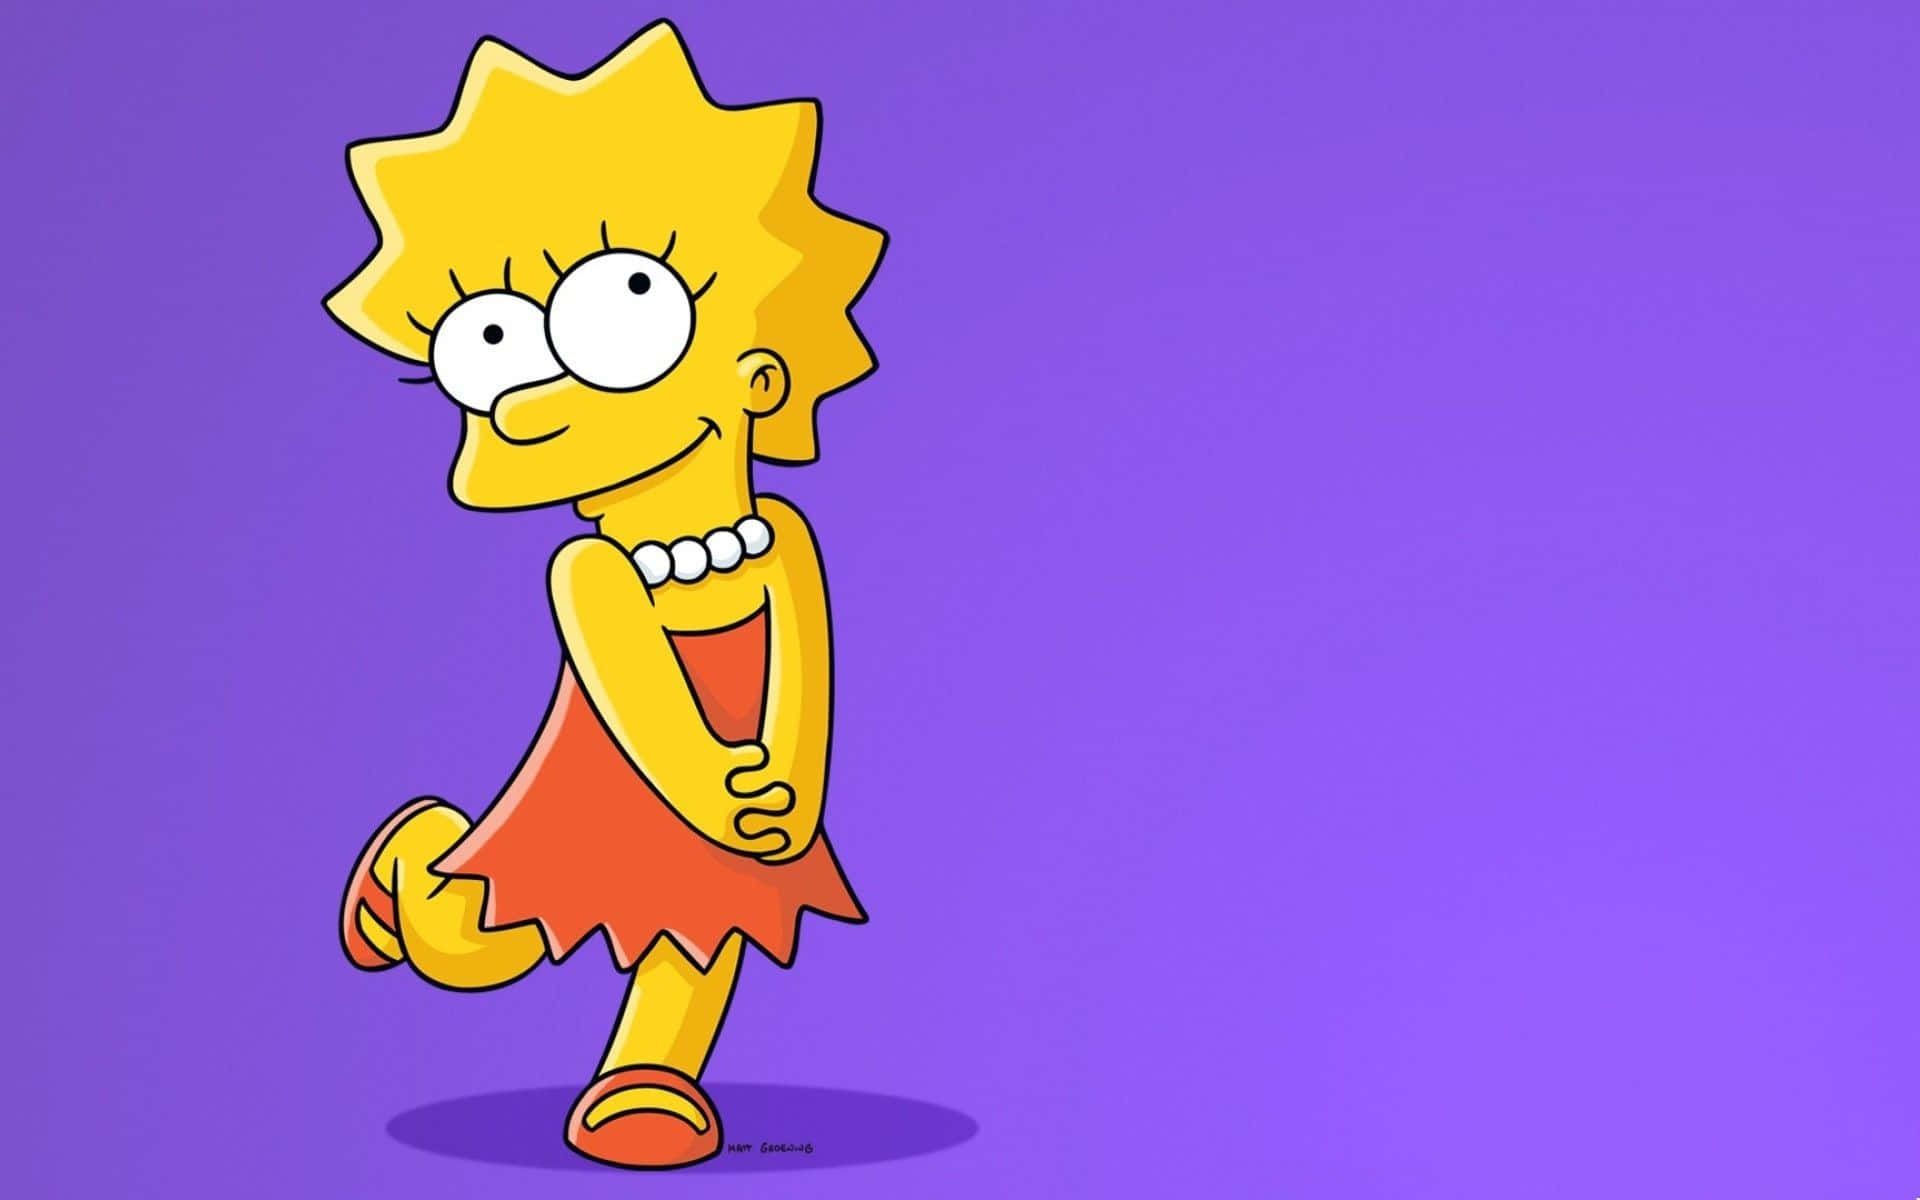 Lisa Simpson is a fictional character from the animated television series The Simpsons. She is the middle child of the Simpson family, and is known for her intelligence and love of classical music. - The Simpsons, Lisa Simpson